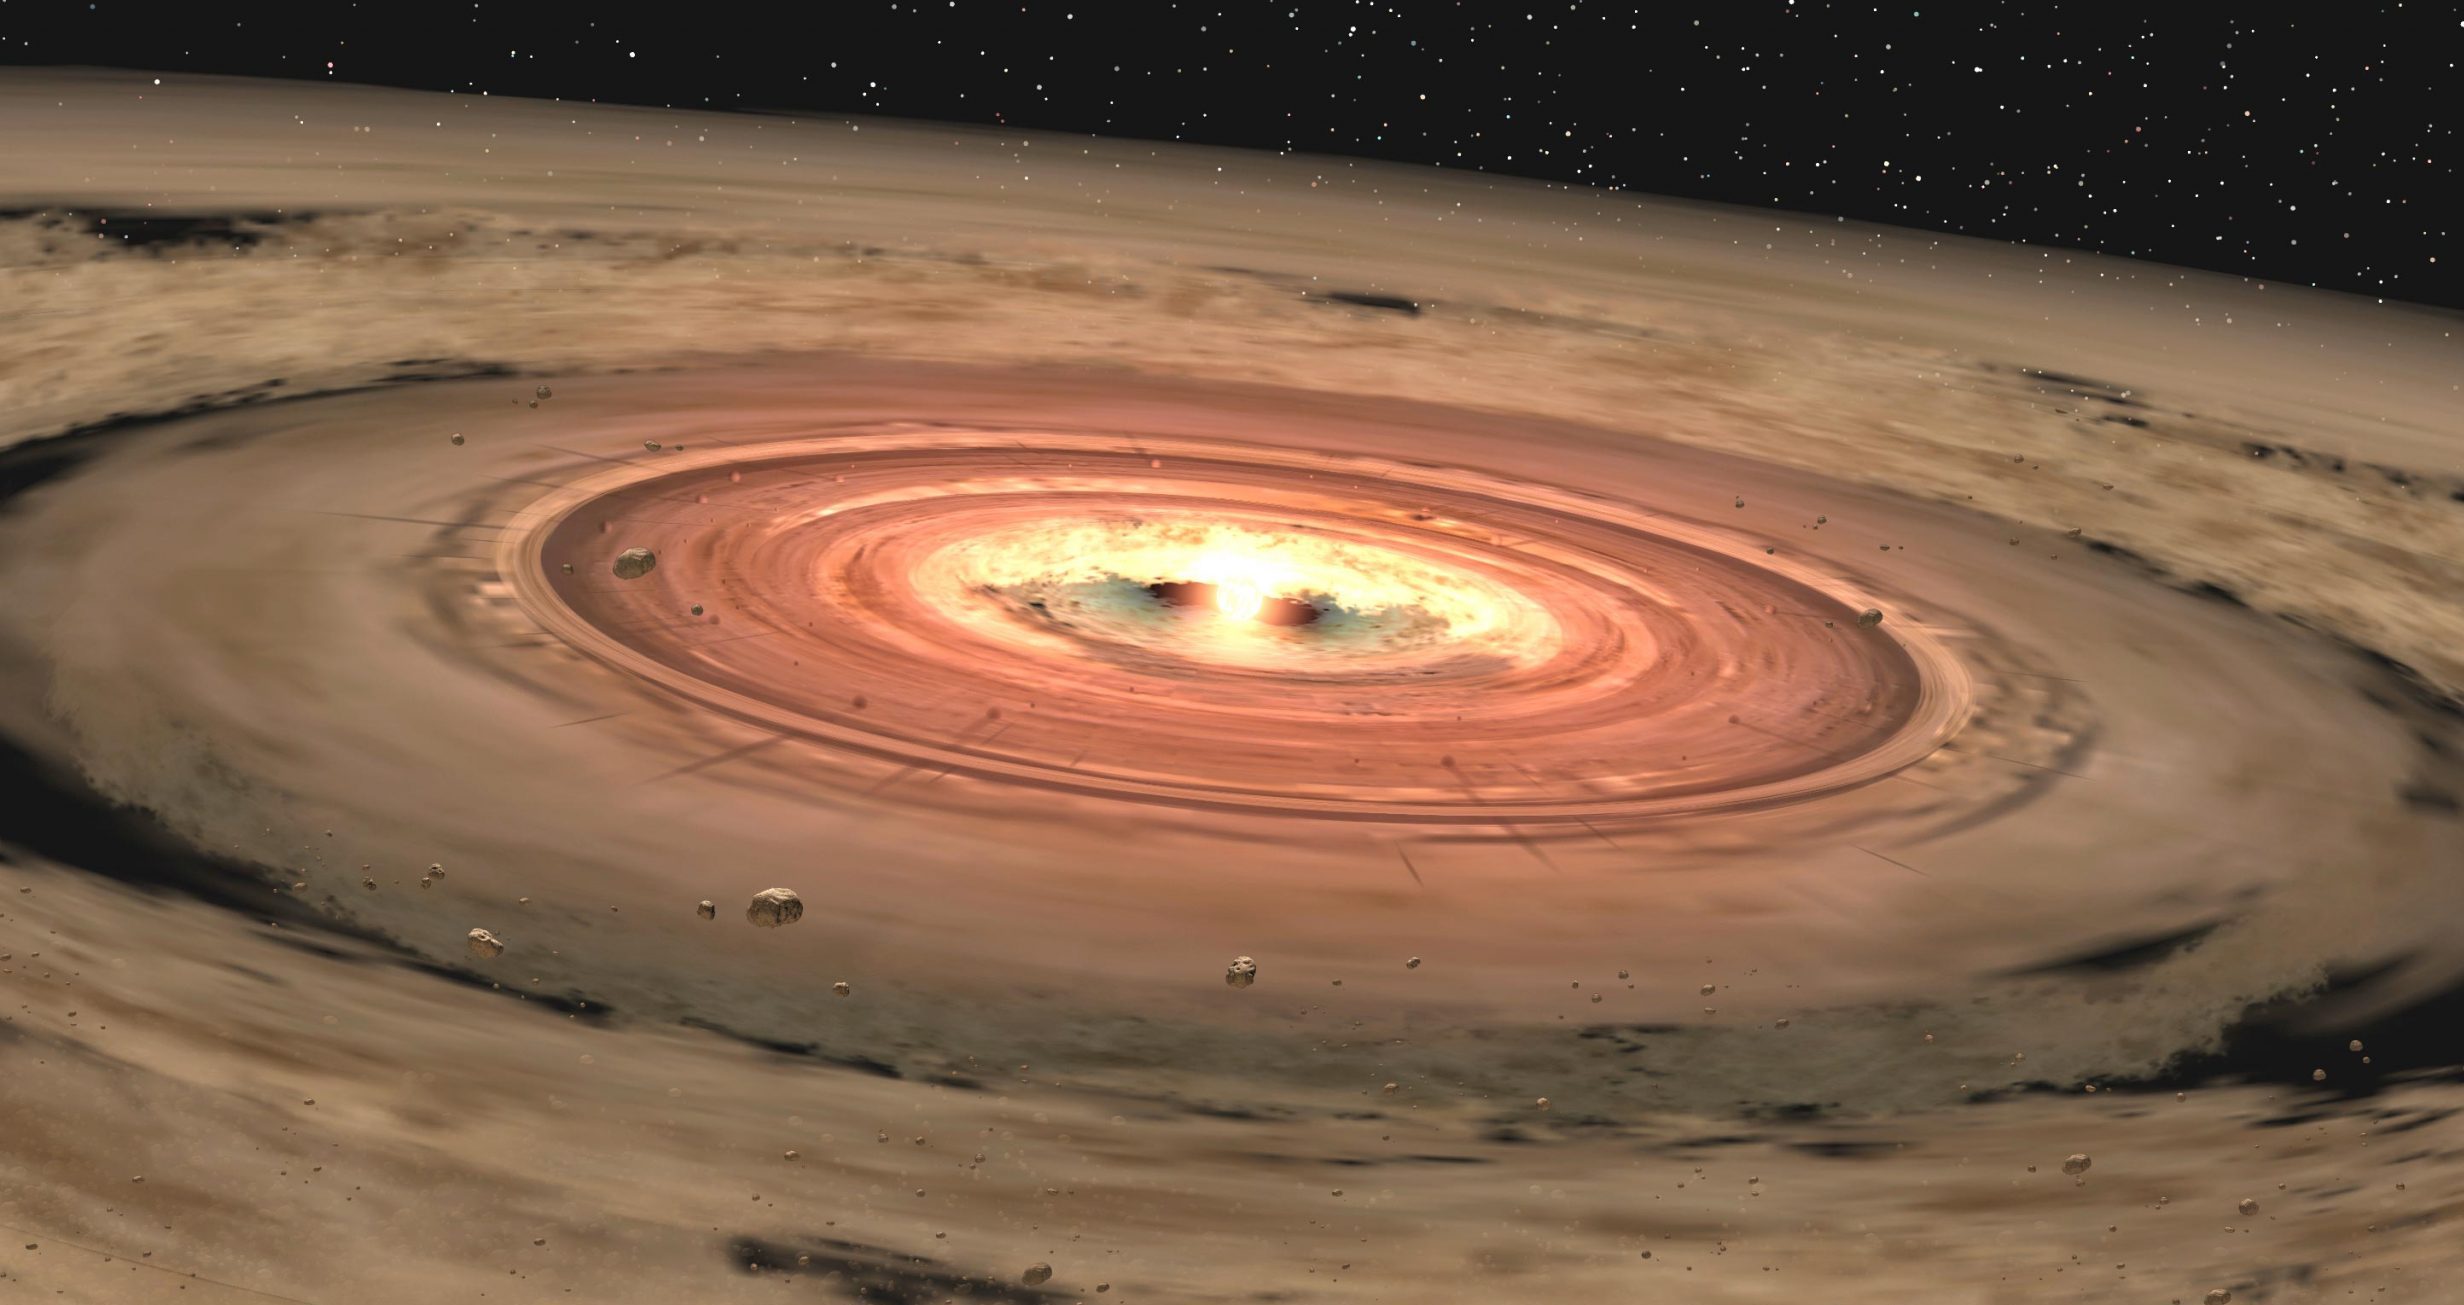 Artist's impression of a protoplanetary disk of dust and gas around a star. Scientists believe that planets can form around dying stars too. Credit: NASA/JPL-CALTECH